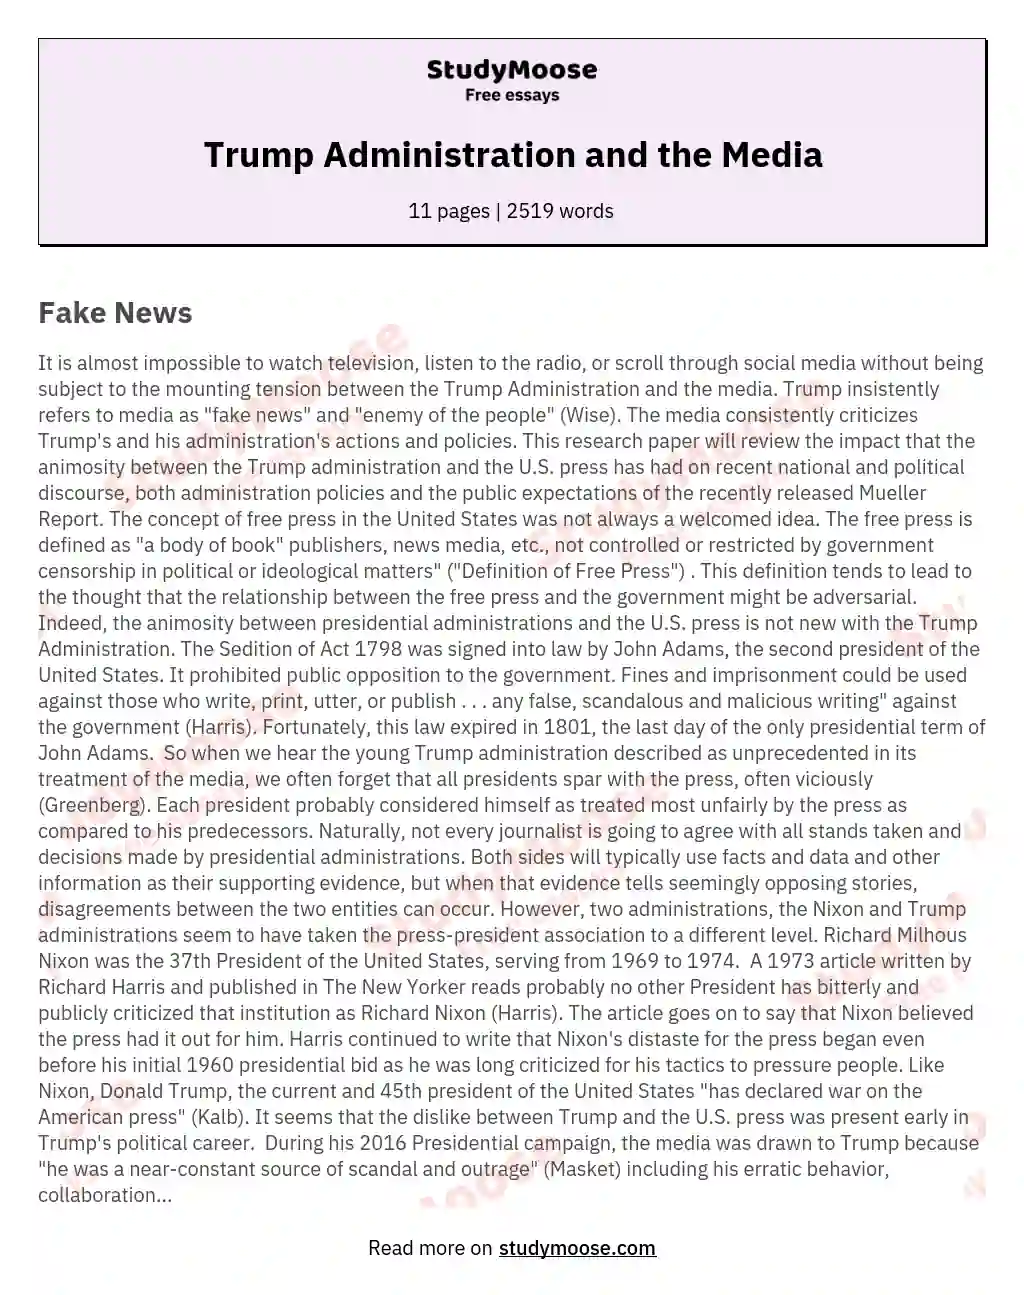 Trump Administration and the Media essay